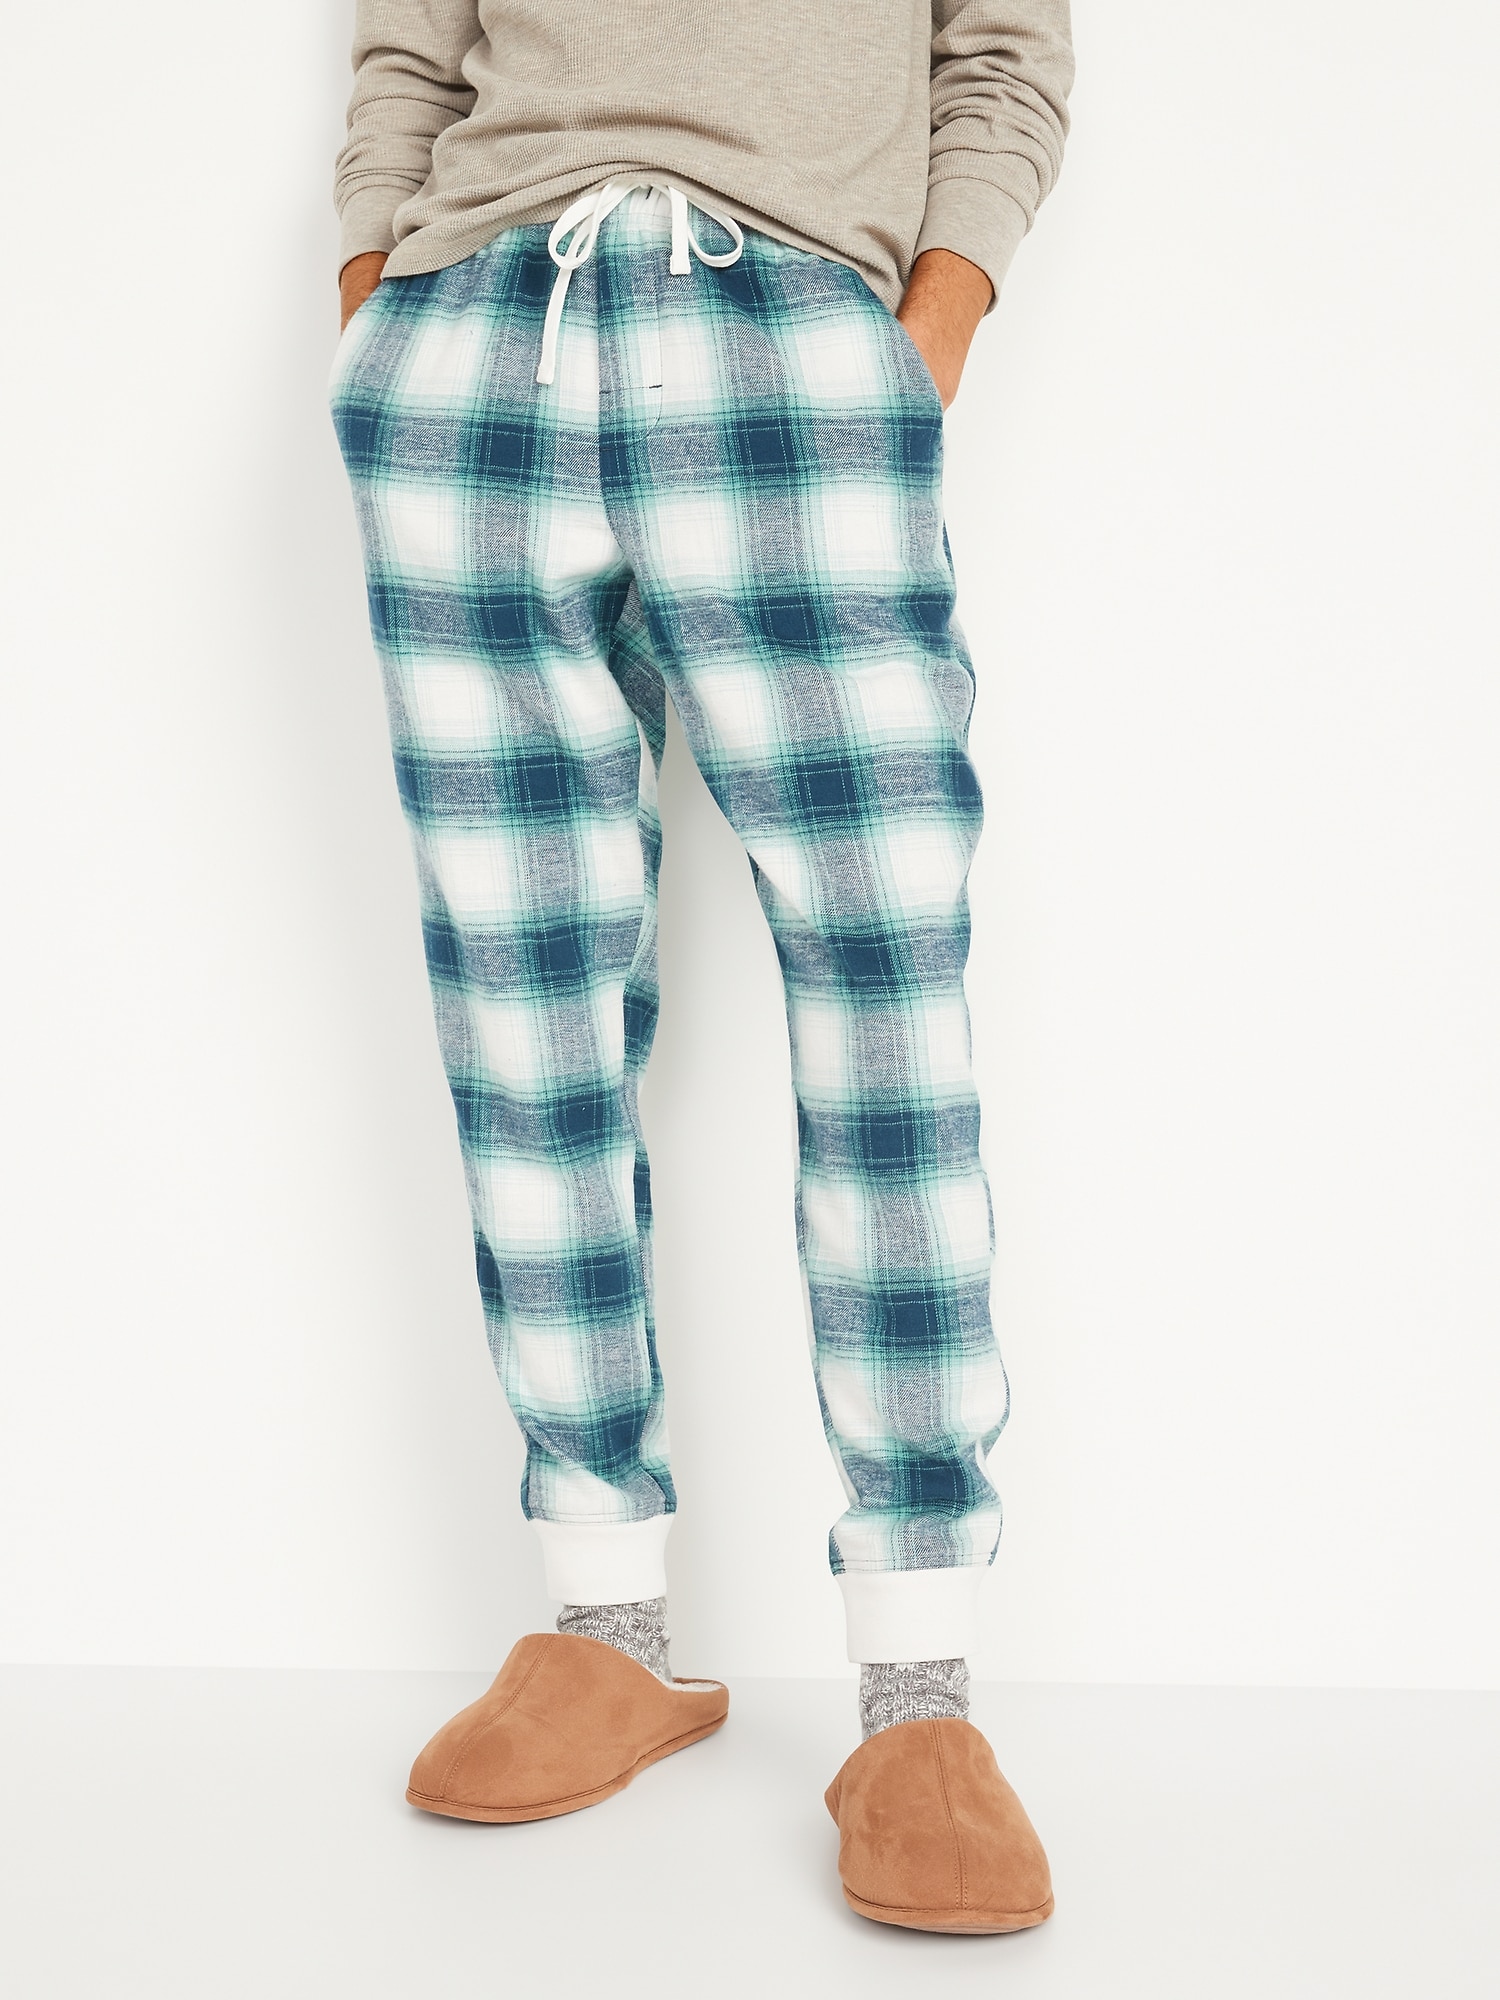 Old Navy Matching Printed Sz.M Flannel Jogger Pajama Pants For Men